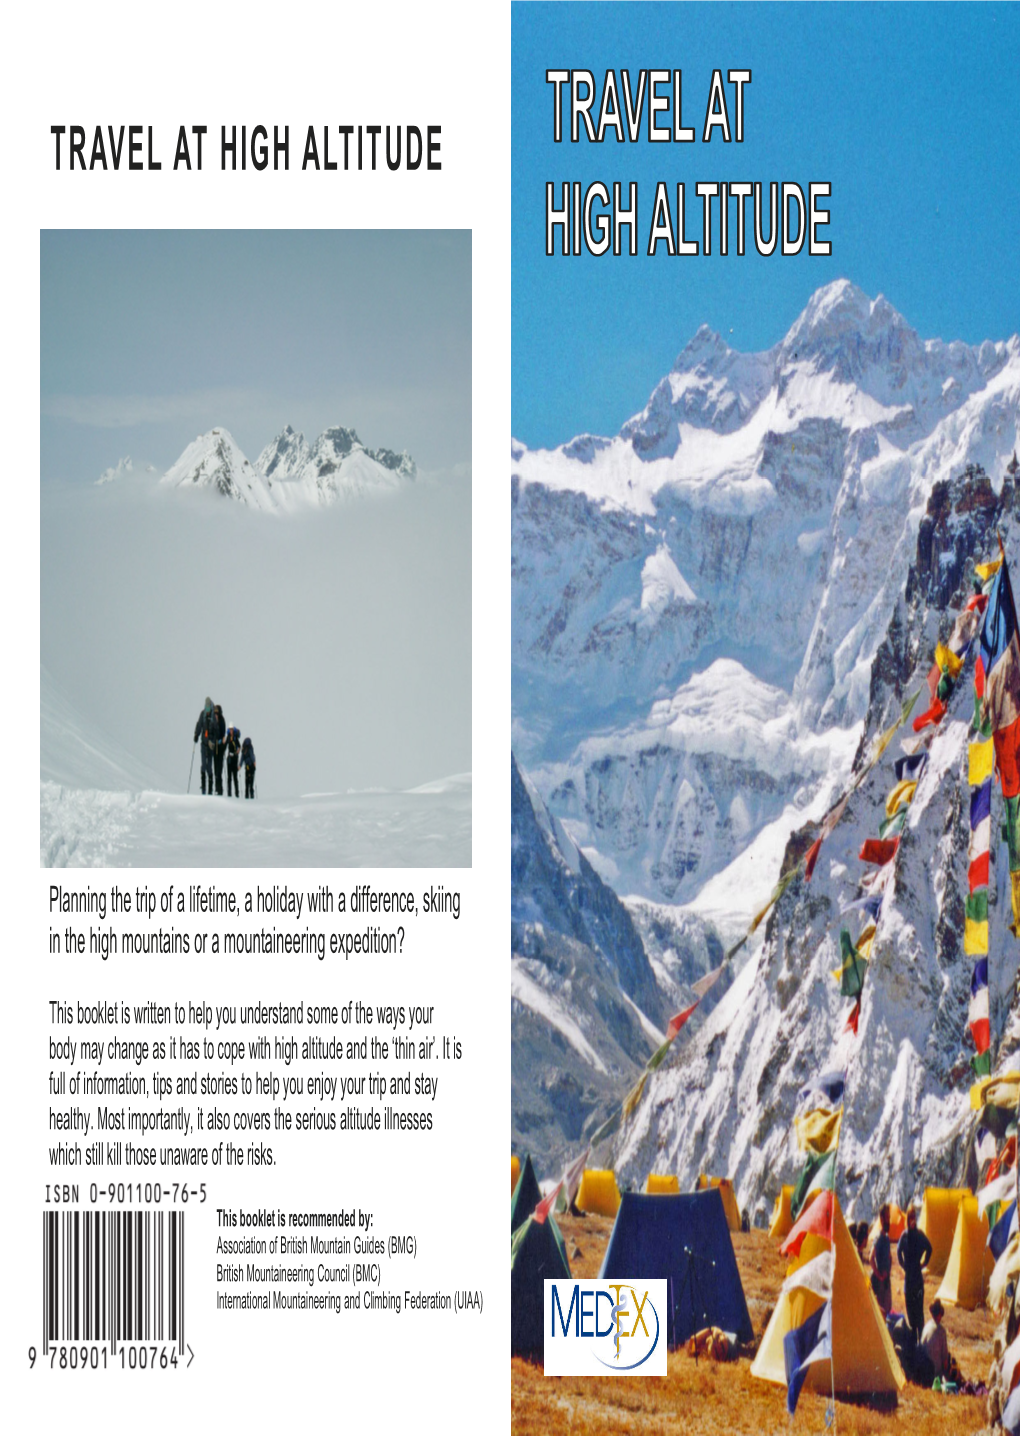 Travel at High Altitude Booklet